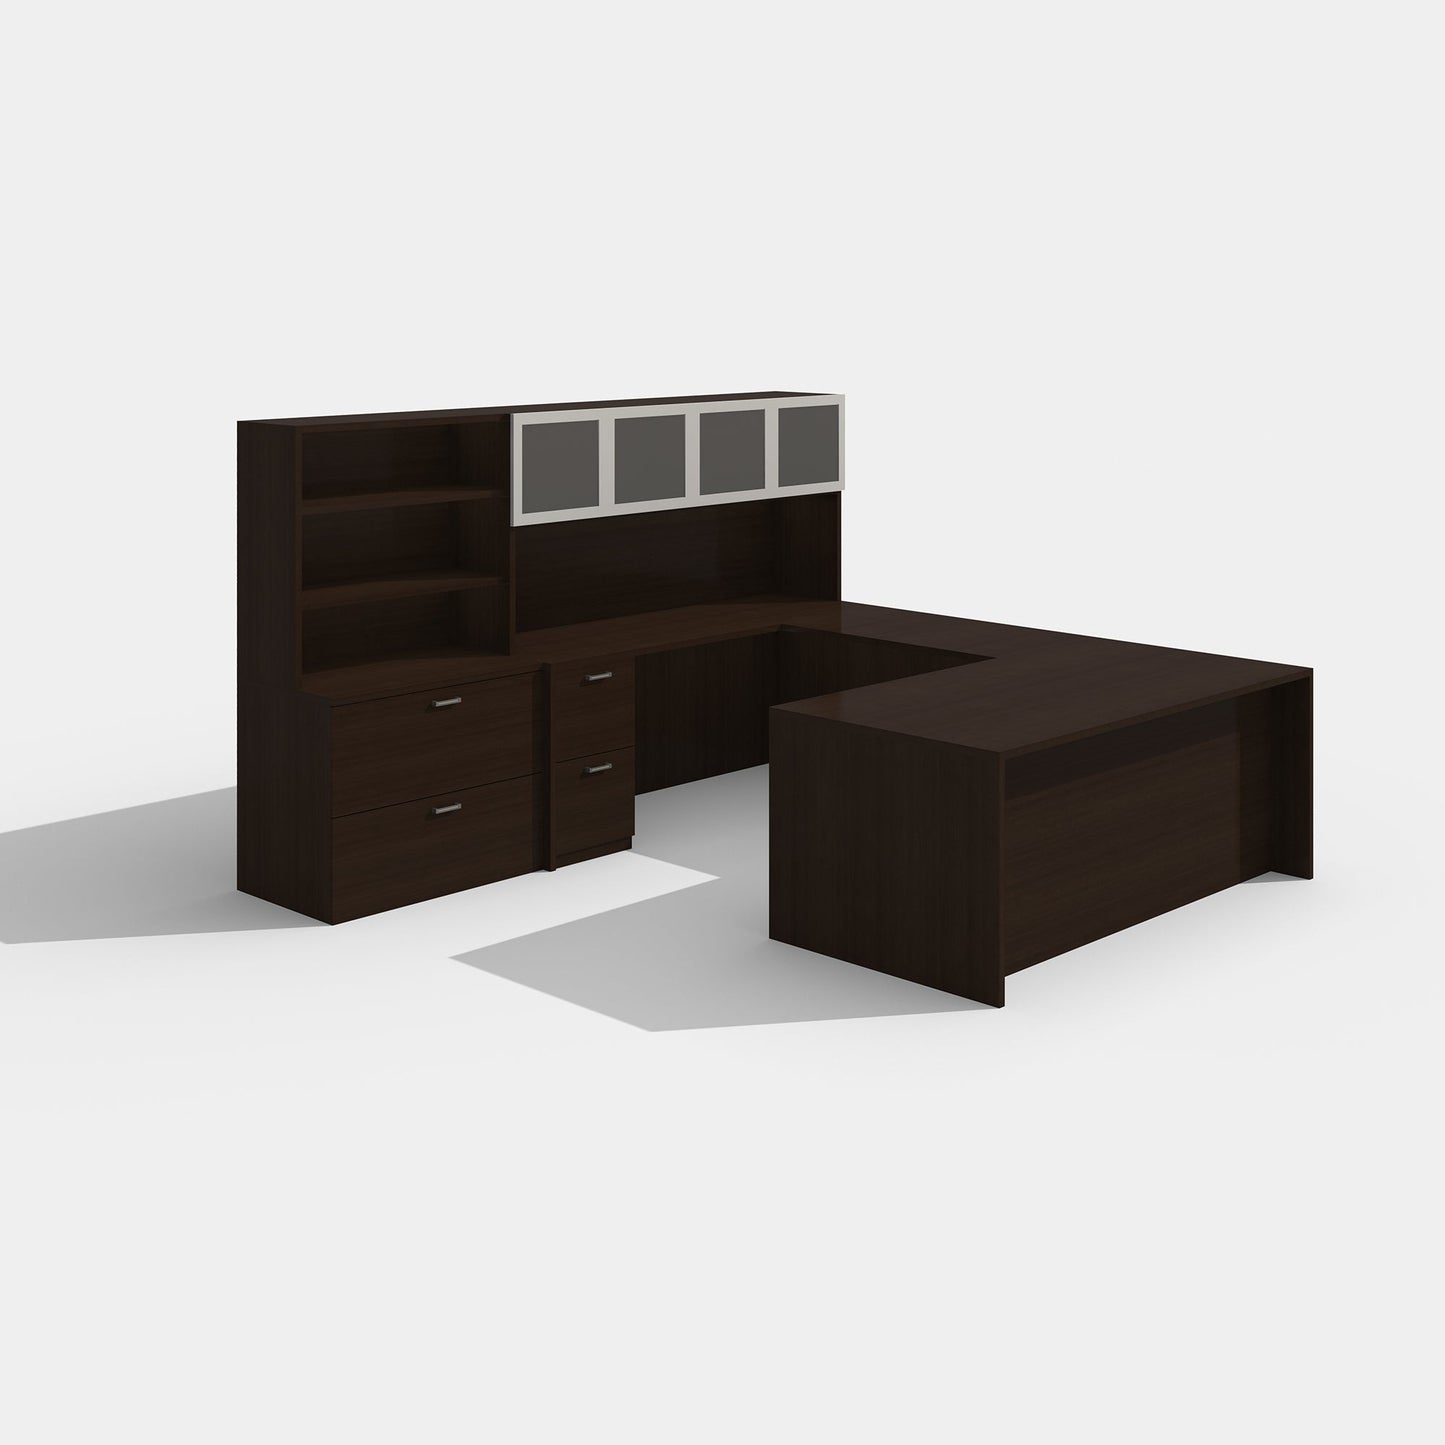 Amber U Shaped Executive Office Desk Package by Cherryman Industries - Wholesale Office Furniture